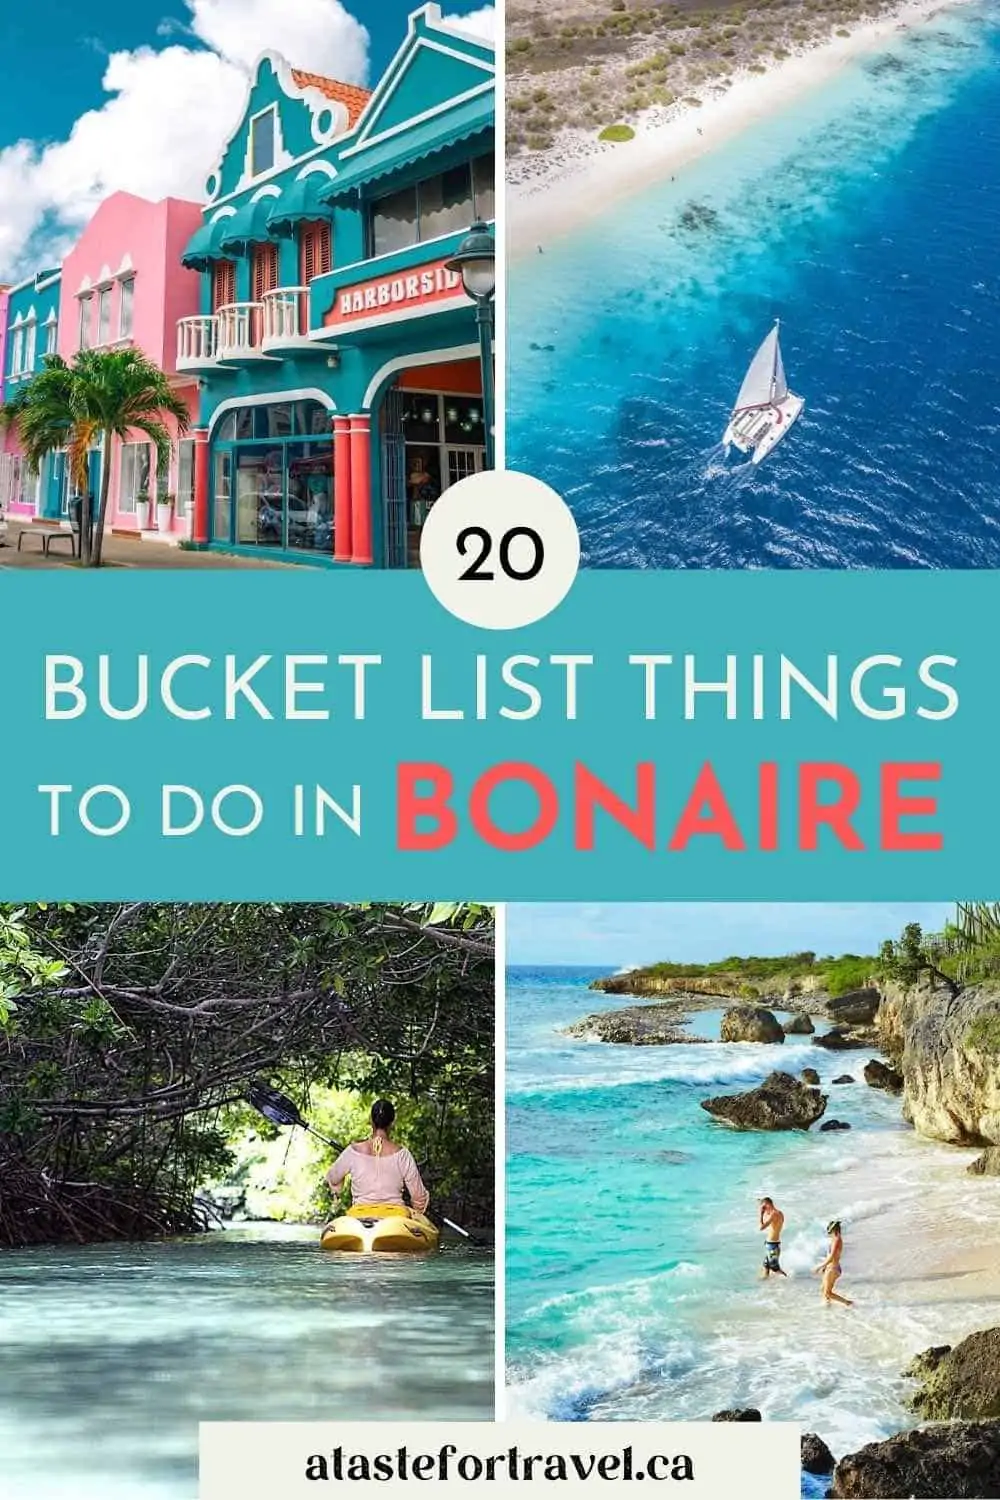 Collage of images of Bonaire for Pinterest.